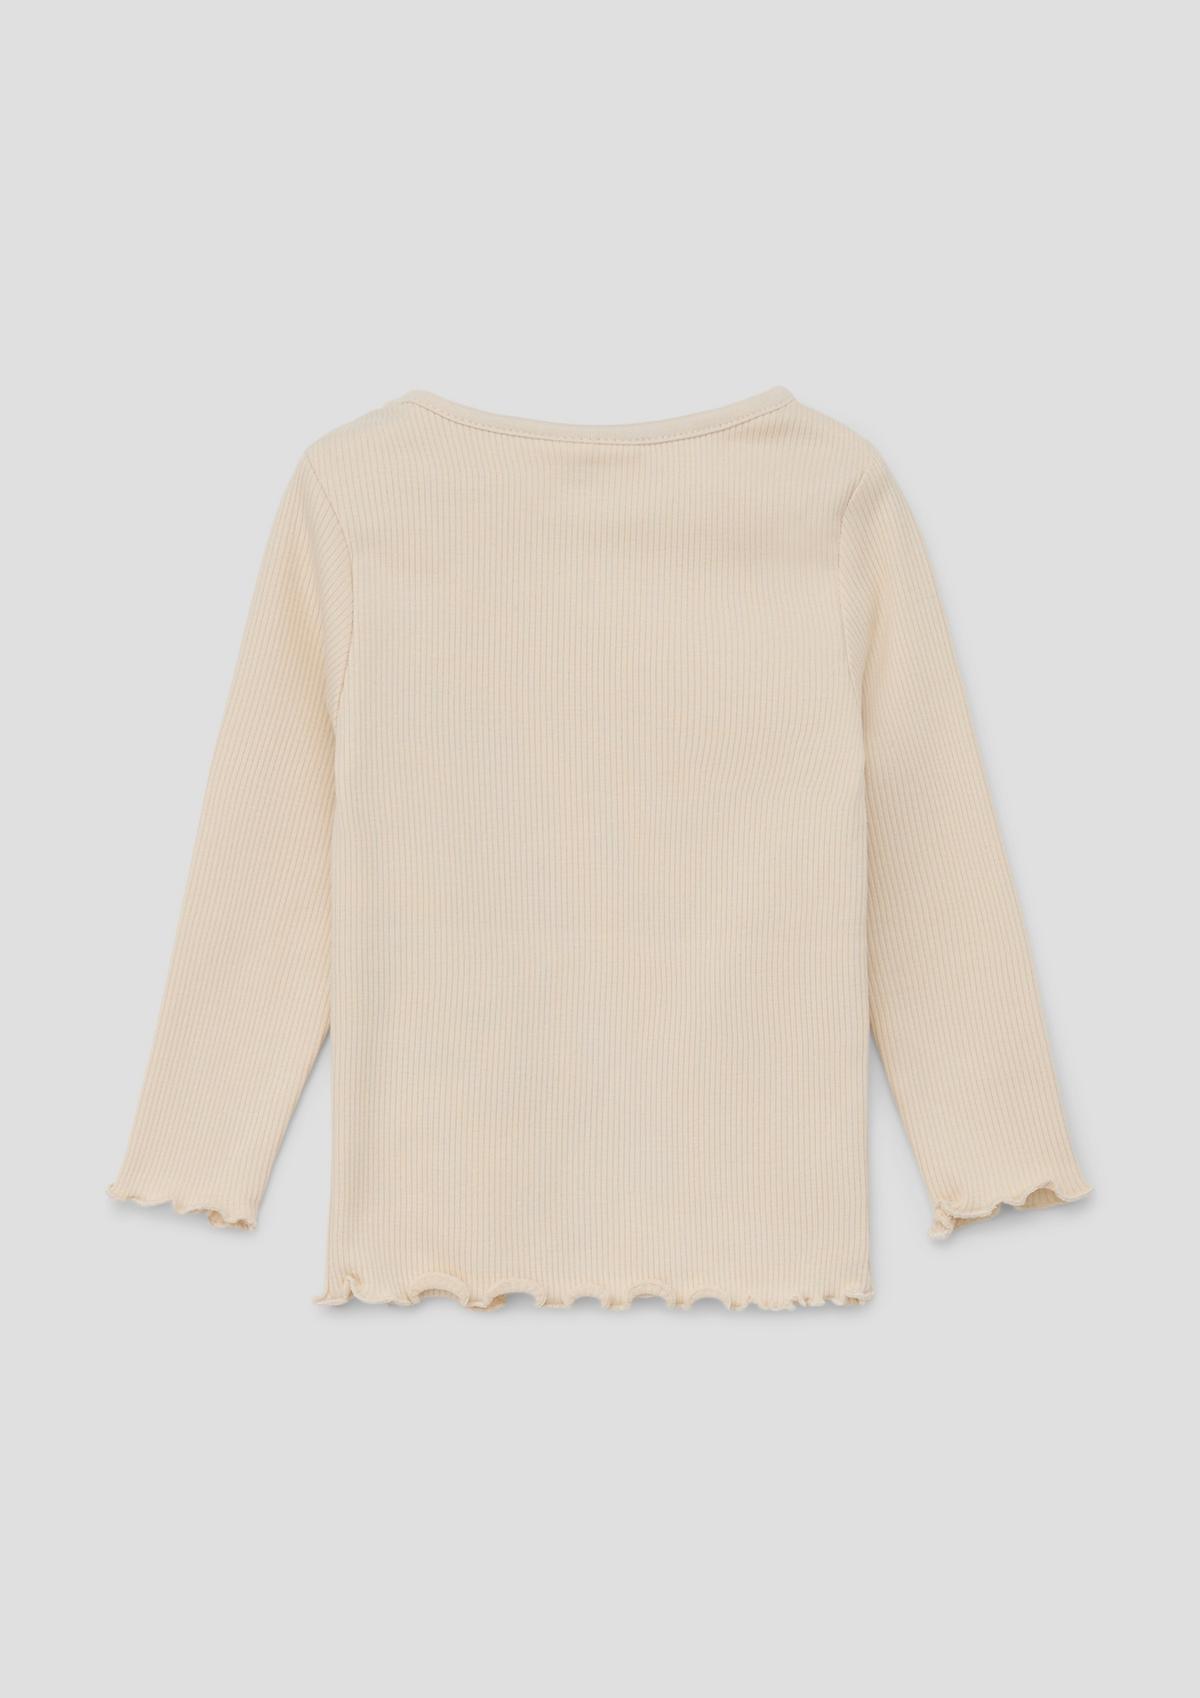 Long sleeve ribbed top with scalloped edge - white sand